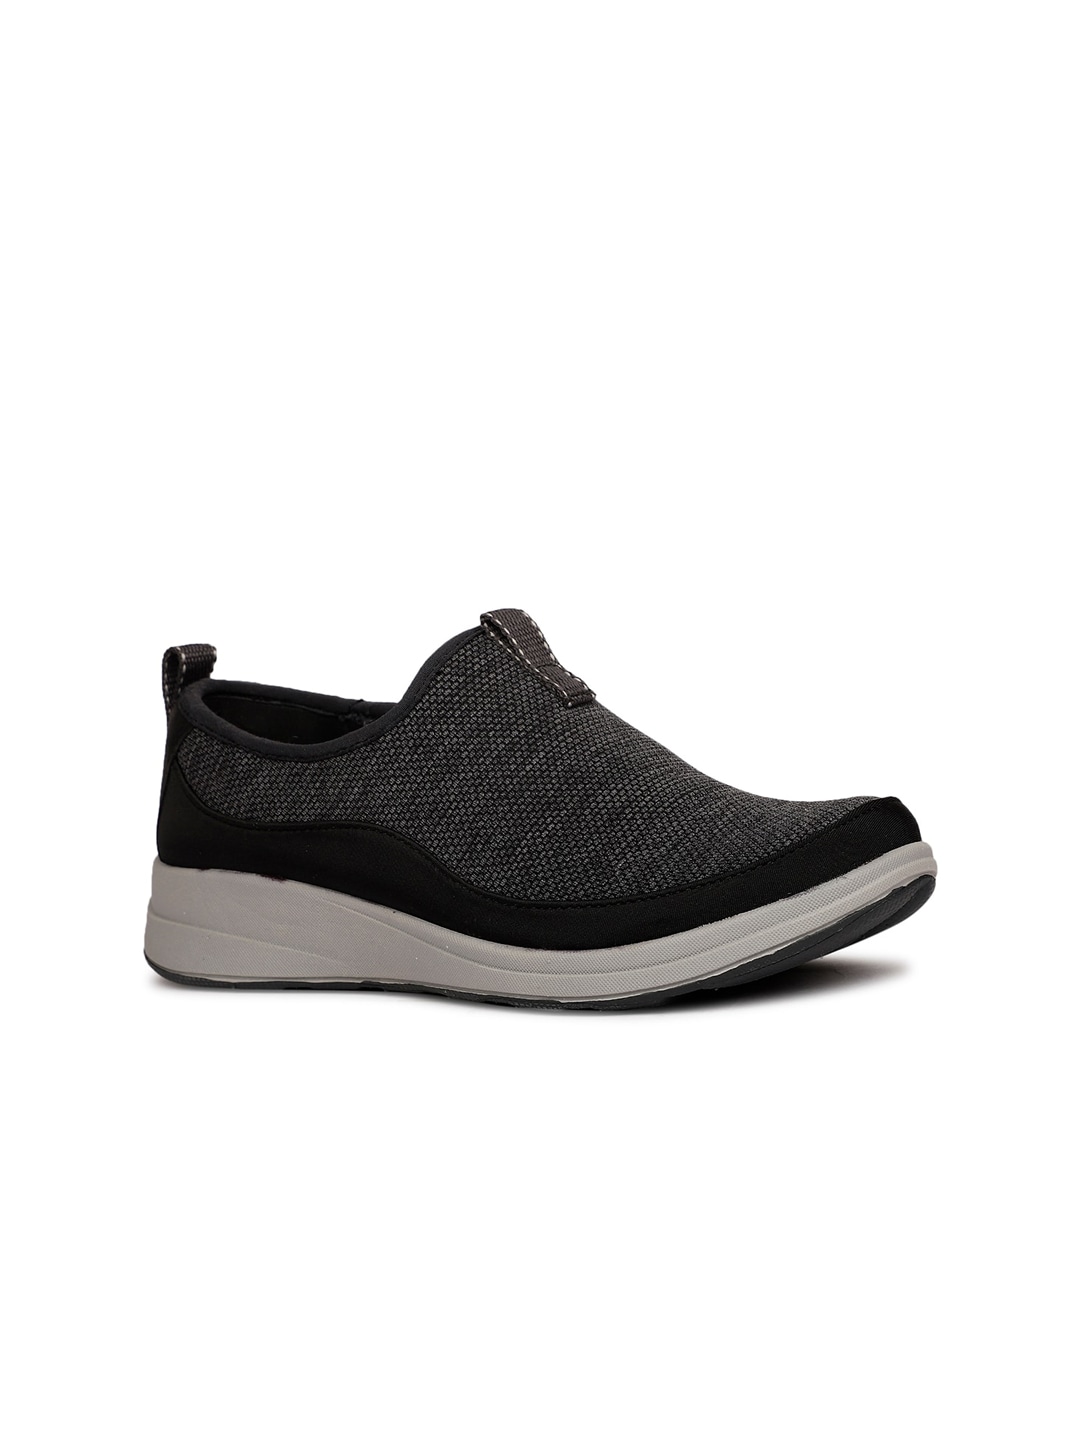 Naturalizer Women Woven Design Slip-On Sneakers Price in India